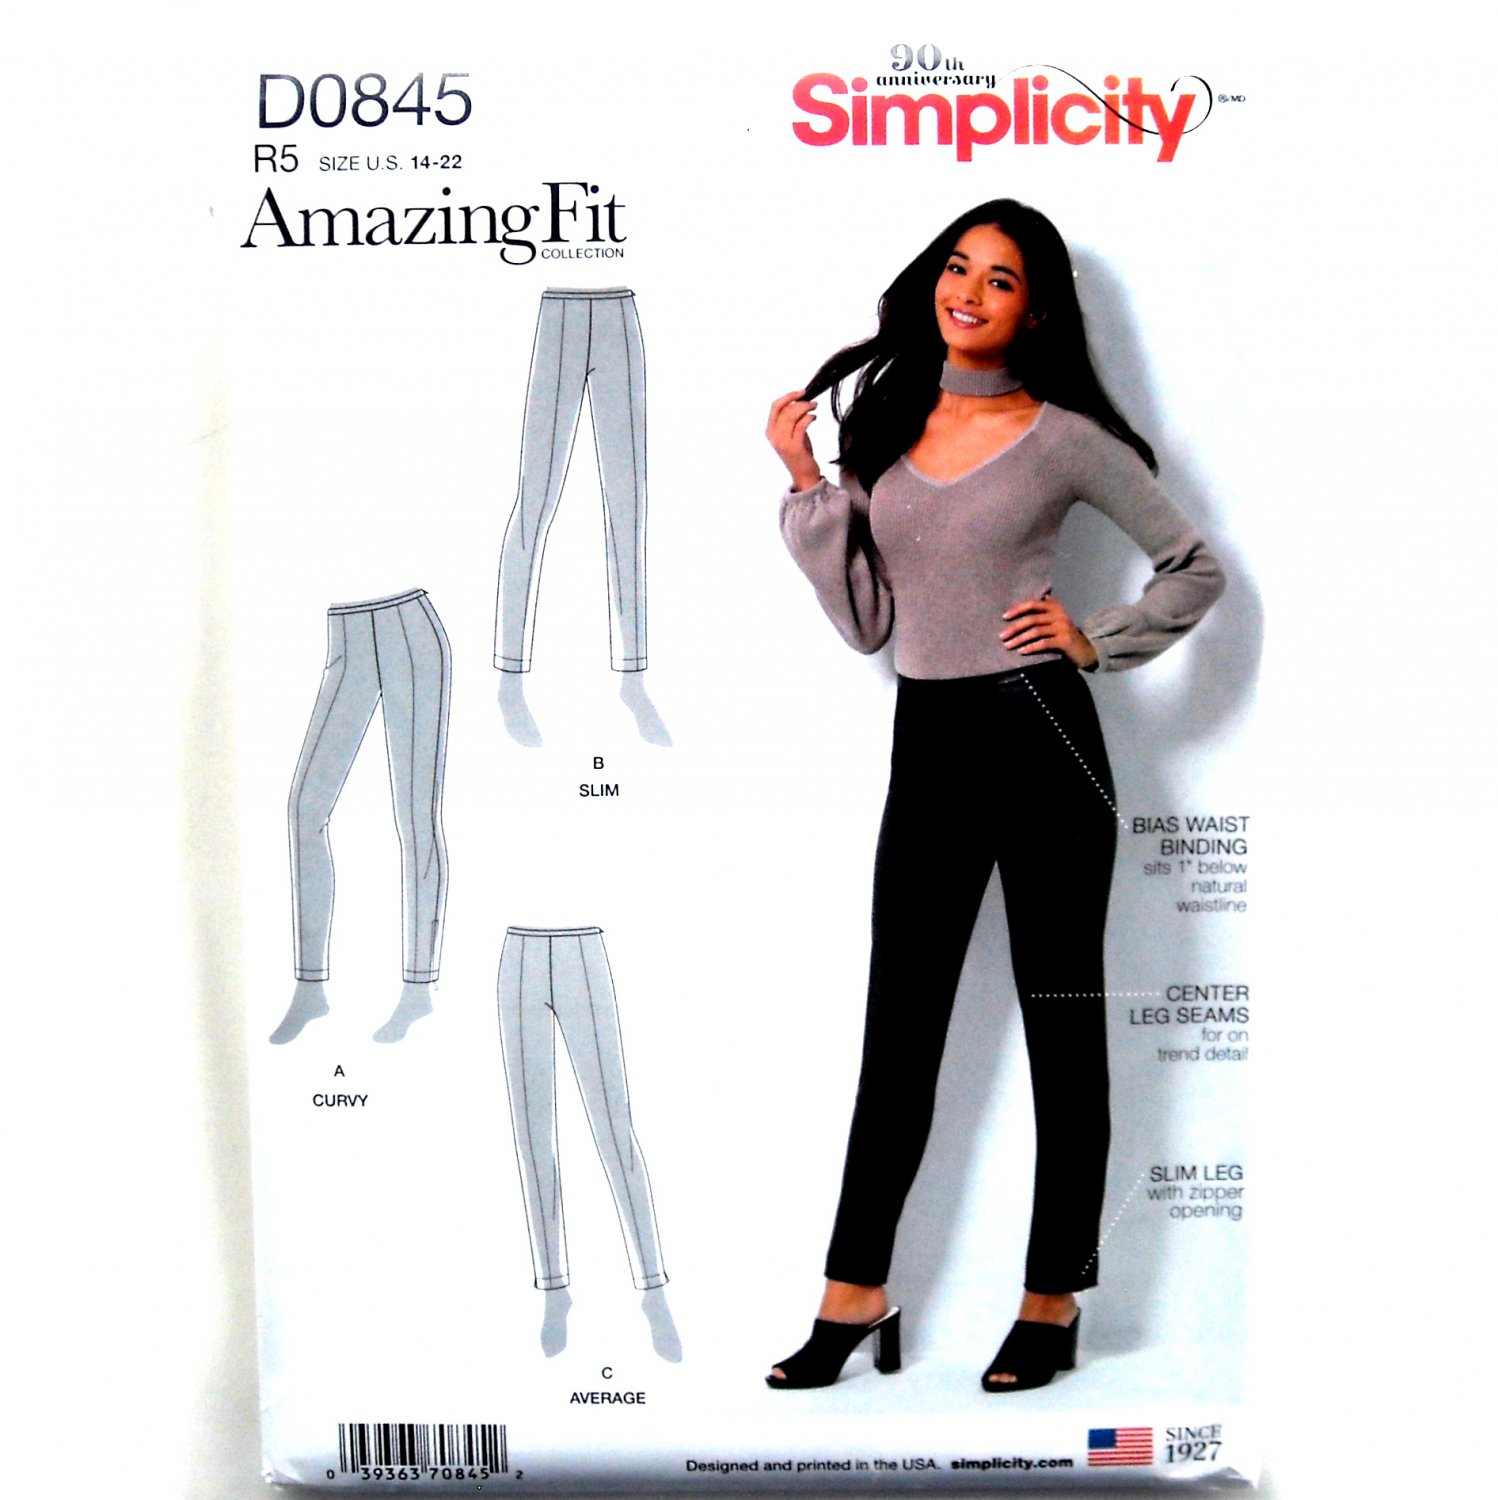 Misses' Women's Skinny Pants Amazing Fit Simplicity Sewing Pattern D0845